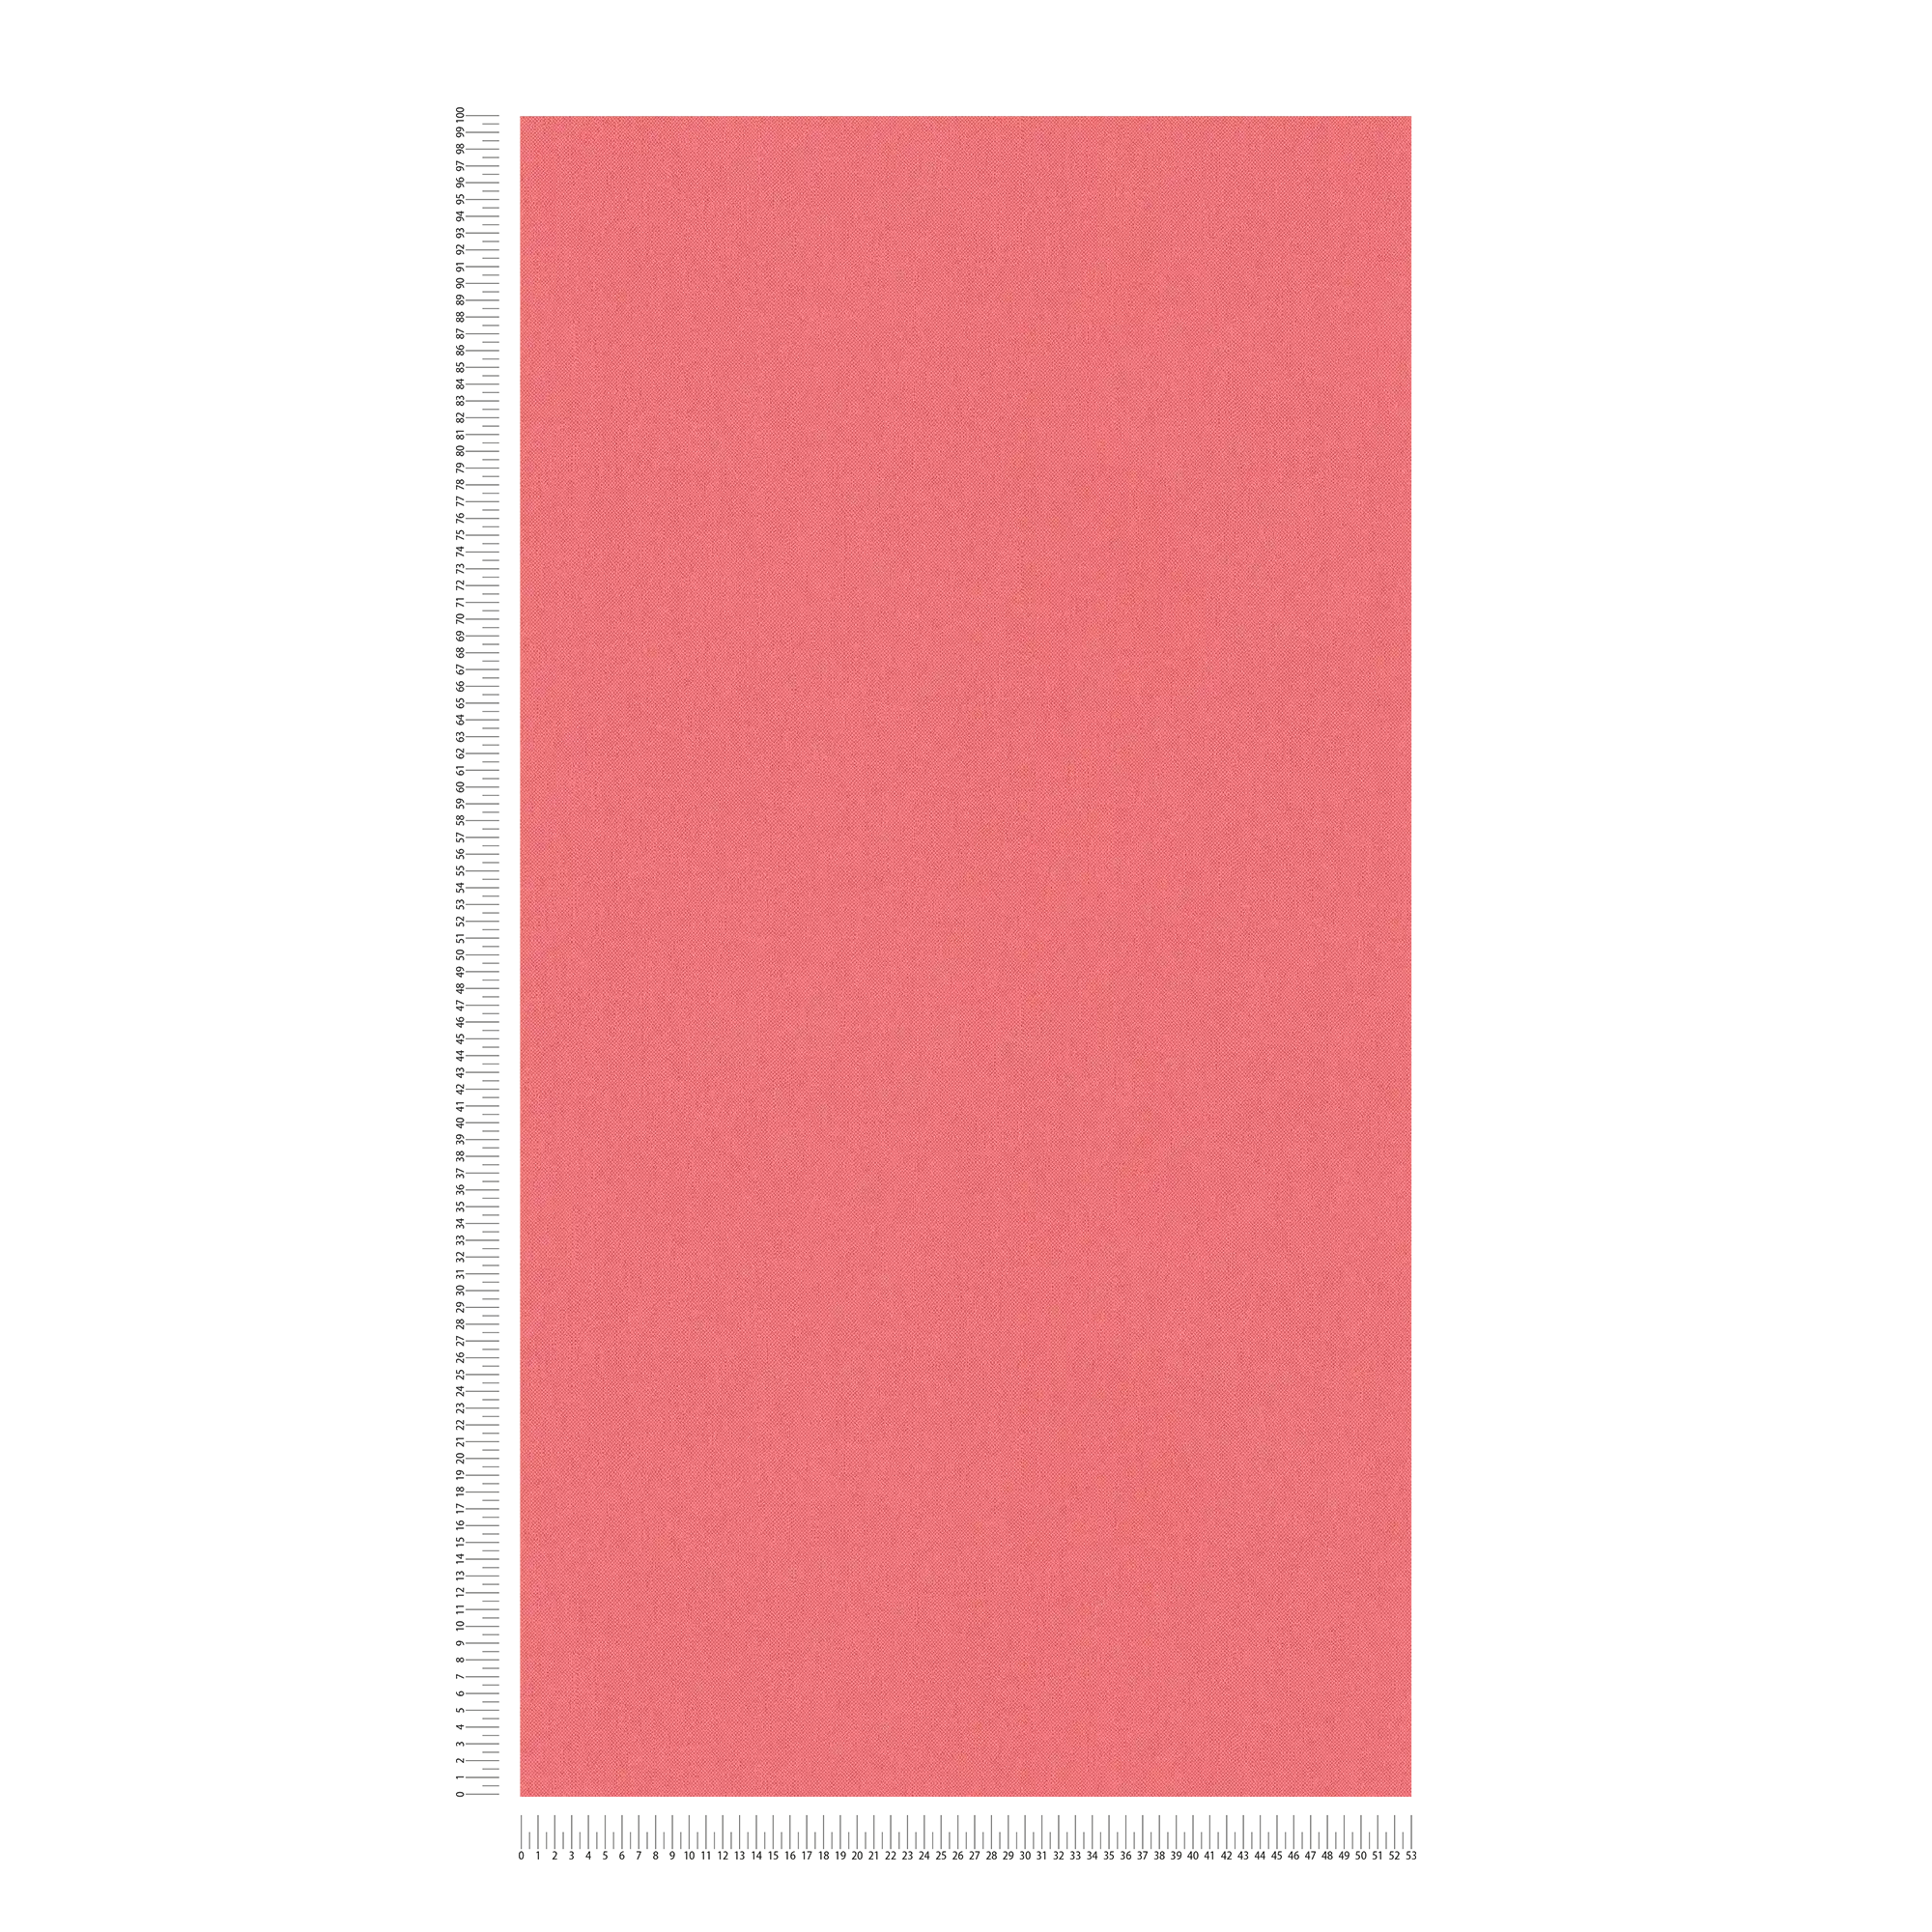             Wallpaper salmon red & pink with plain linen texture for girls room
        